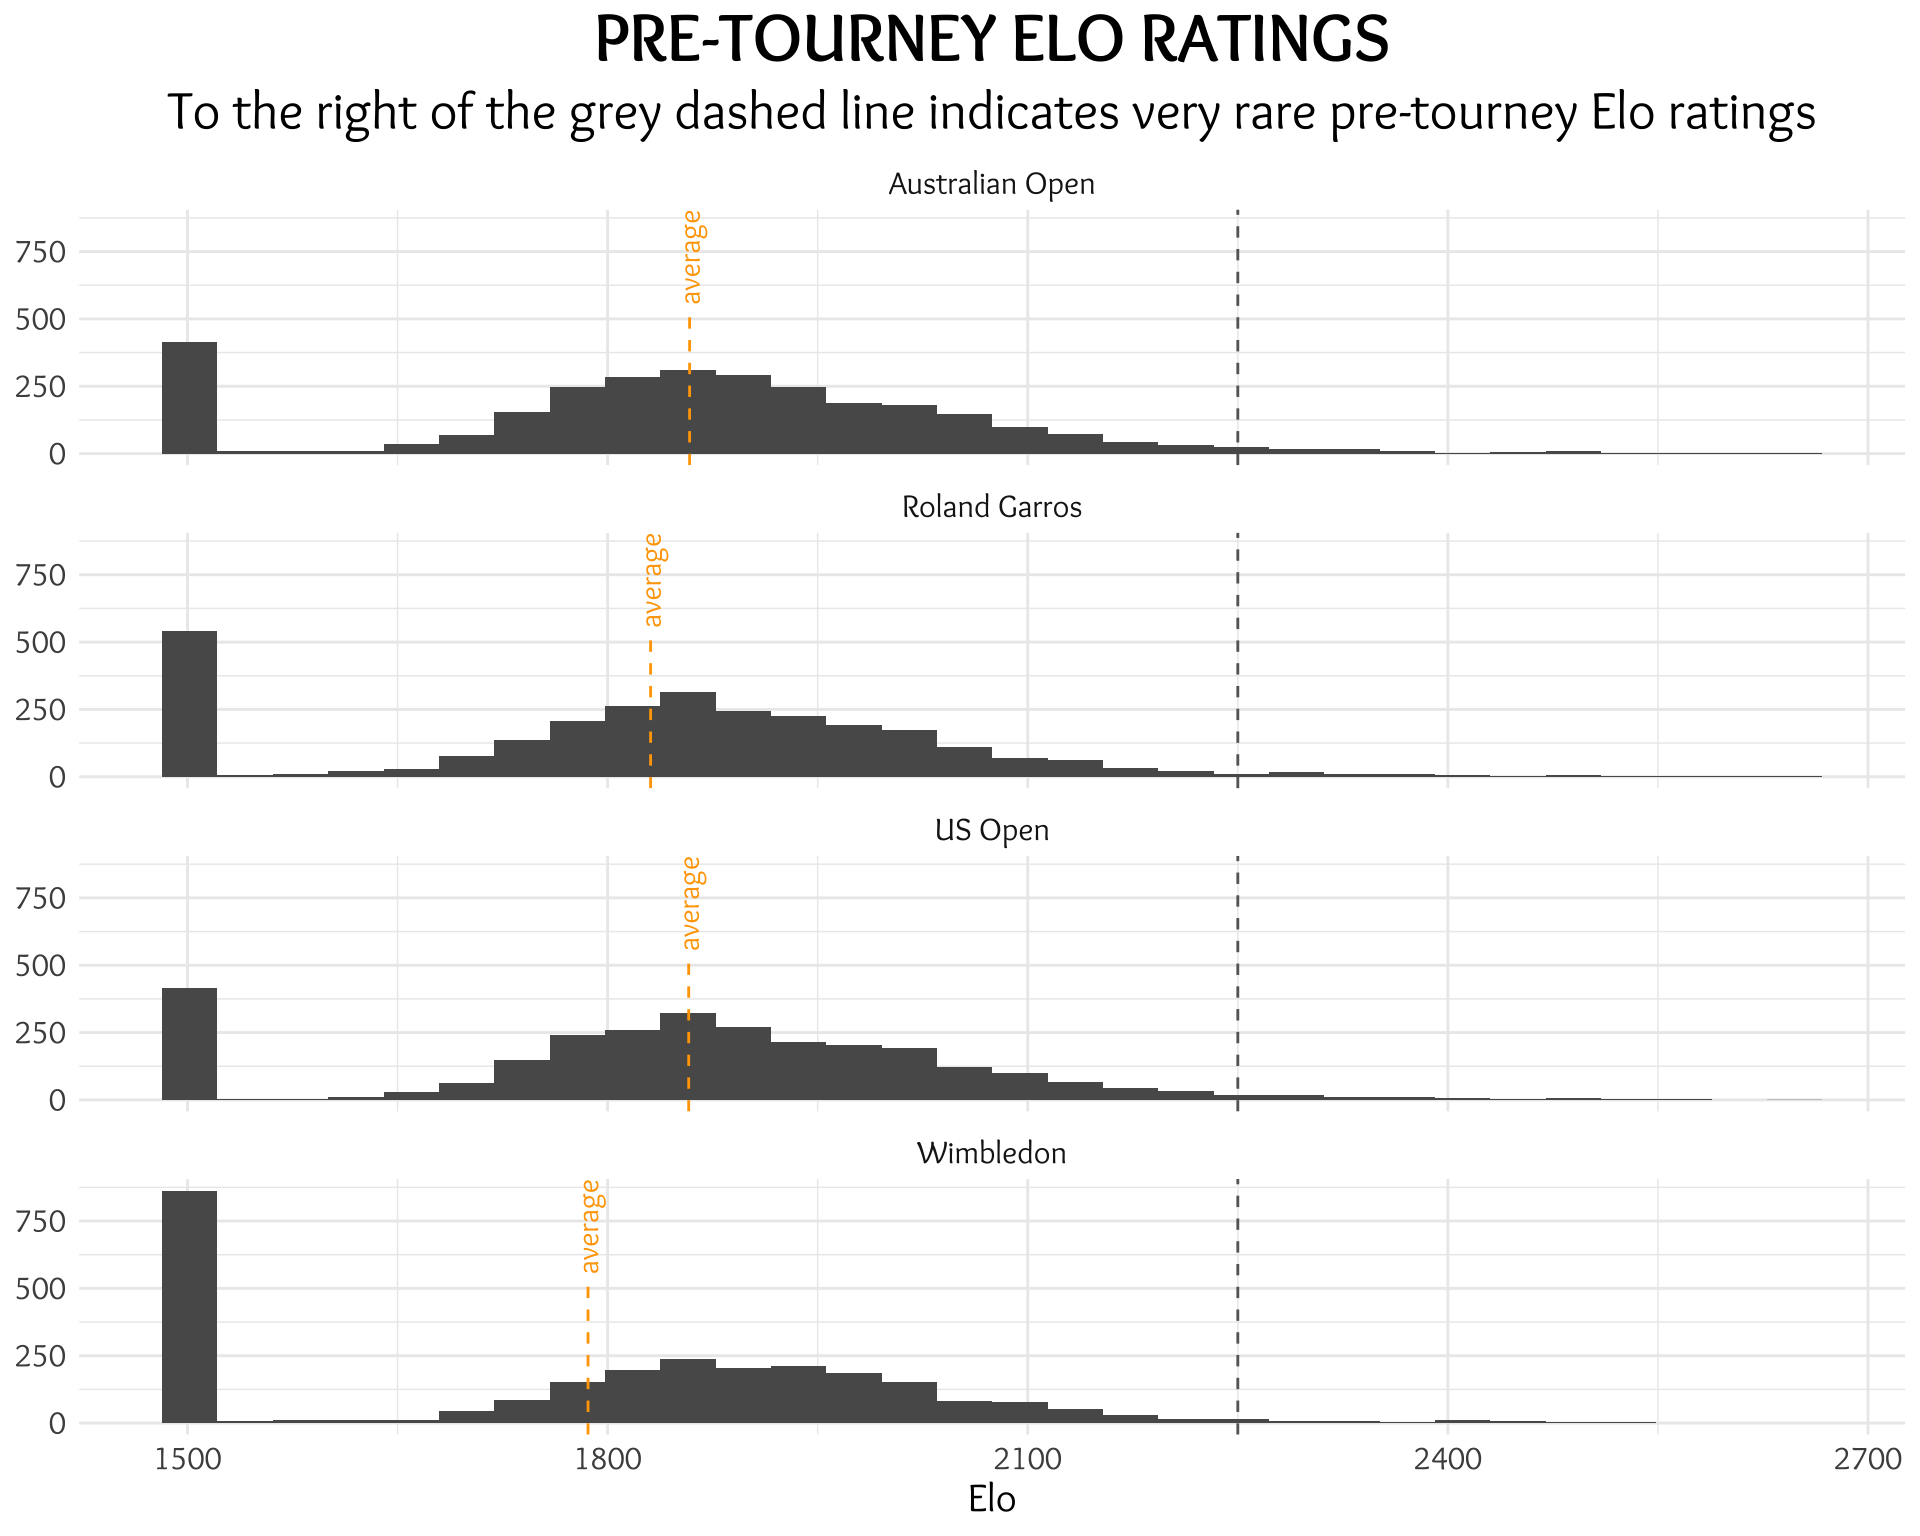 Don't Blame the Data - Rating the Difficulty of the Big 3's Grand Slam Wins